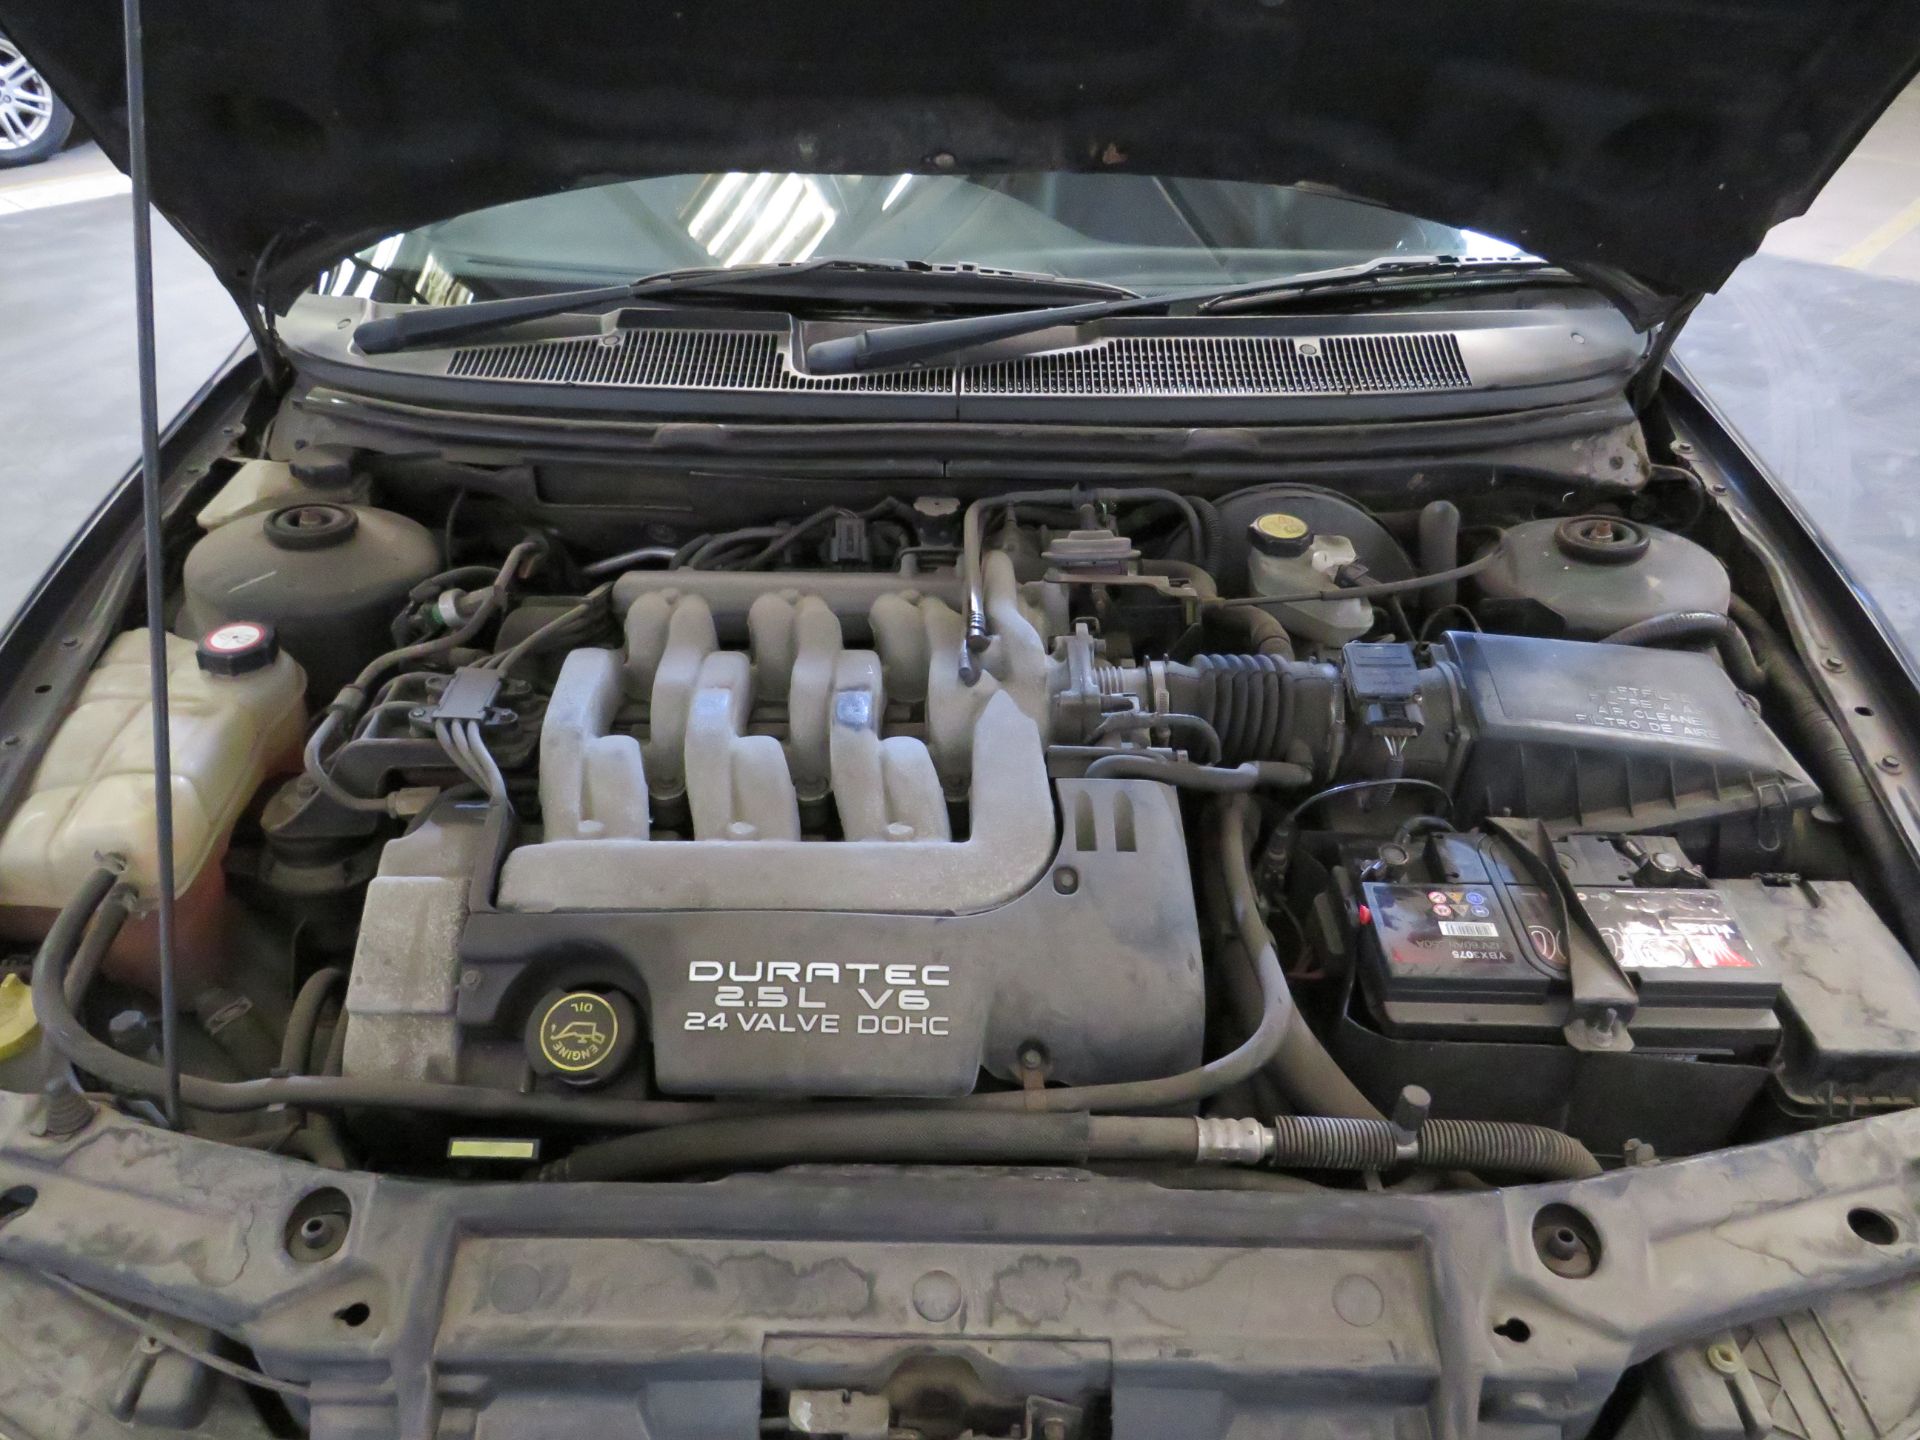 1999 Ford Mondeo ST24 V6 - 2544cc - Image 11 of 14